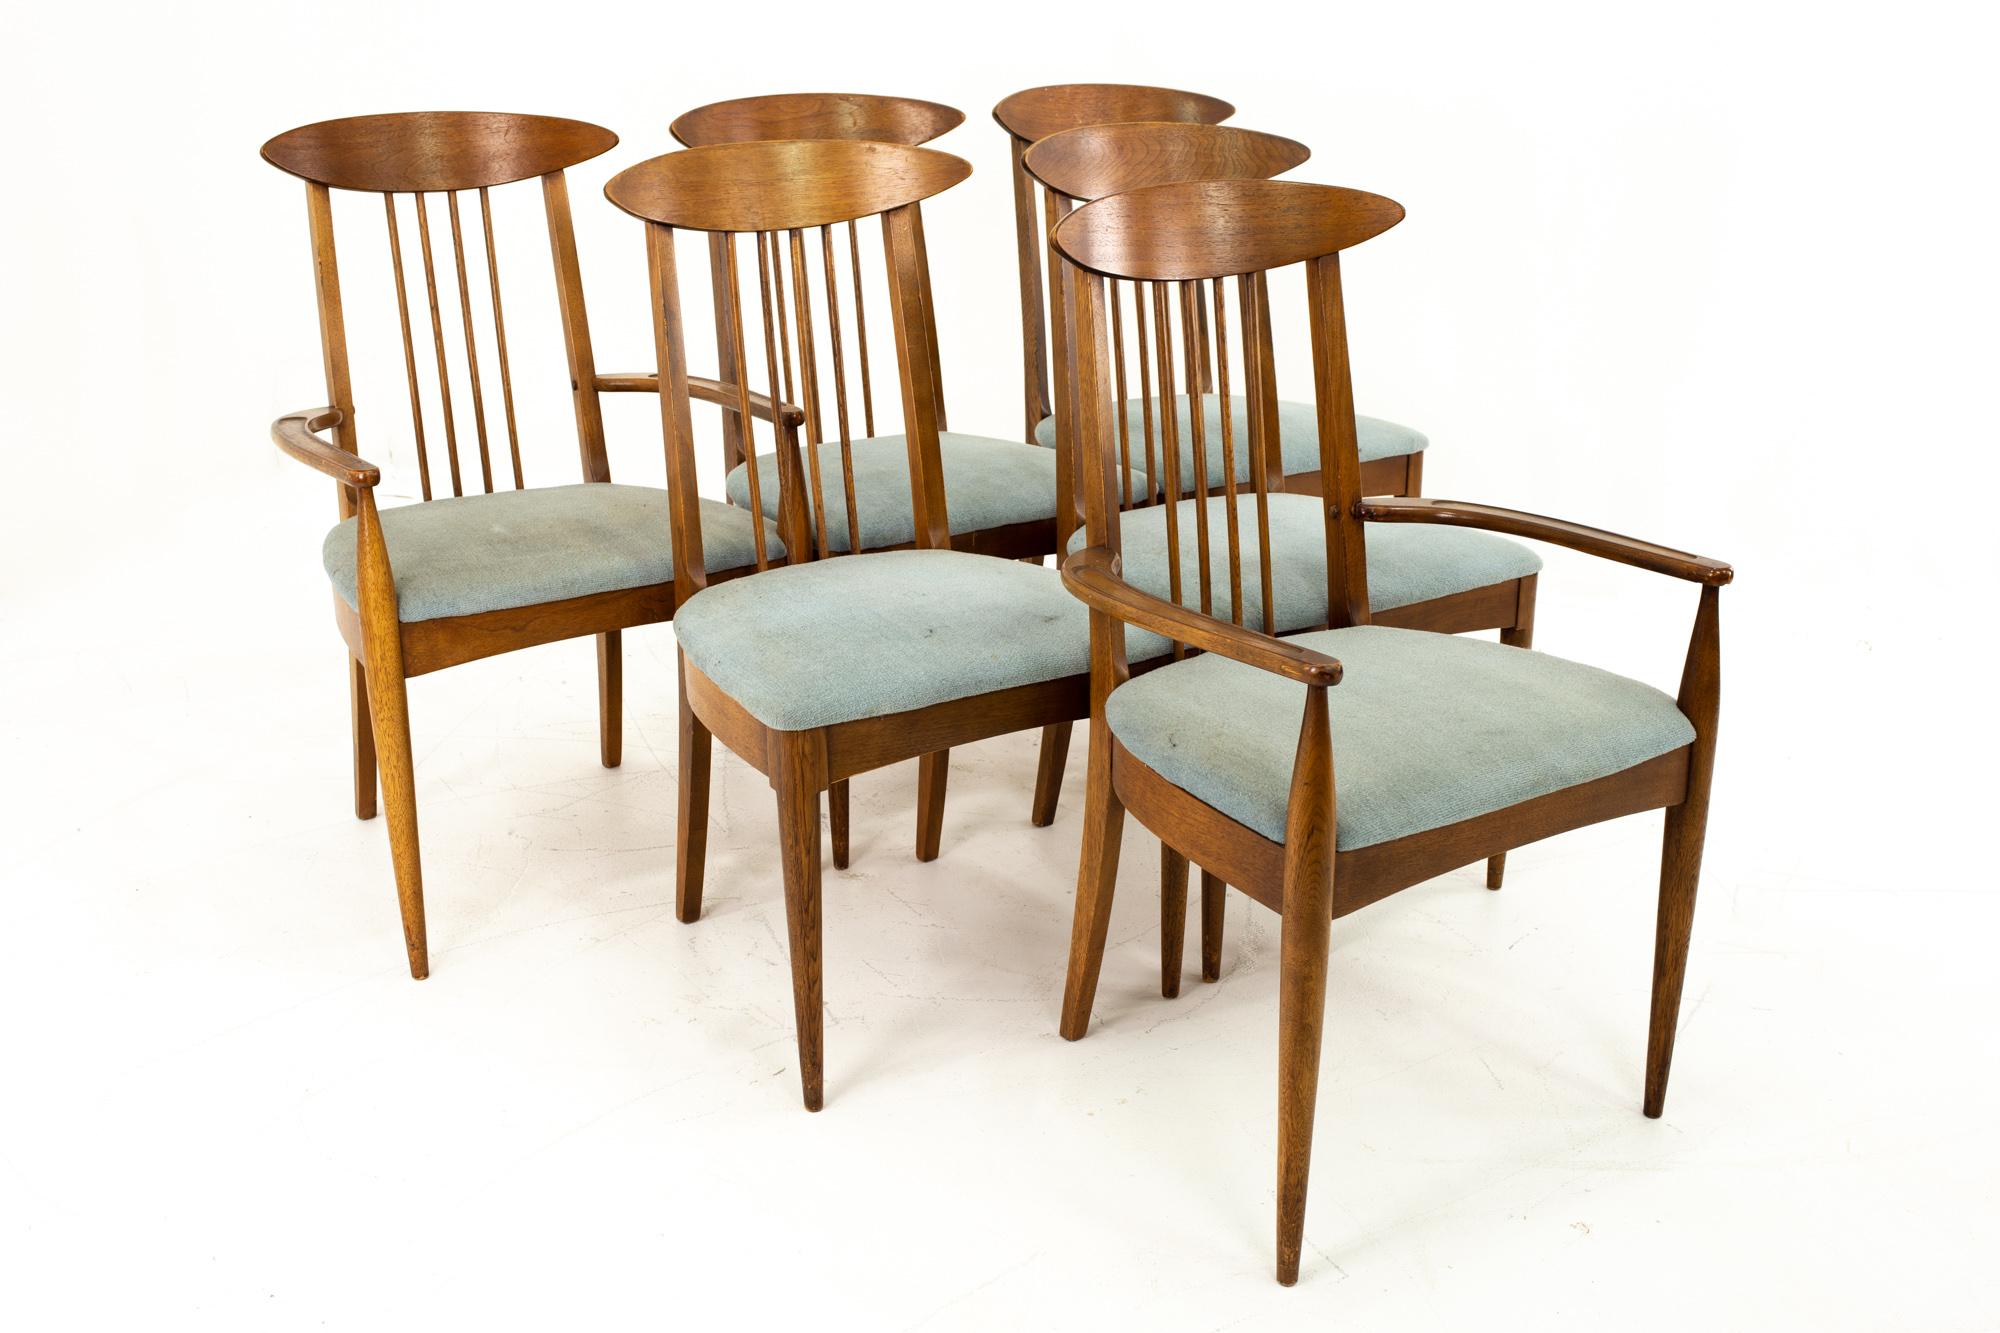 Broyhill Sculptra Mid Century Walnut Cat's Eye Dining Chairs - Set of 6

Each chair measures: 22.5 wide x 19 deep x 36 high with a seat height of 18 inches 

This price includes getting this piece in what we call Restored Vintage Condition. That